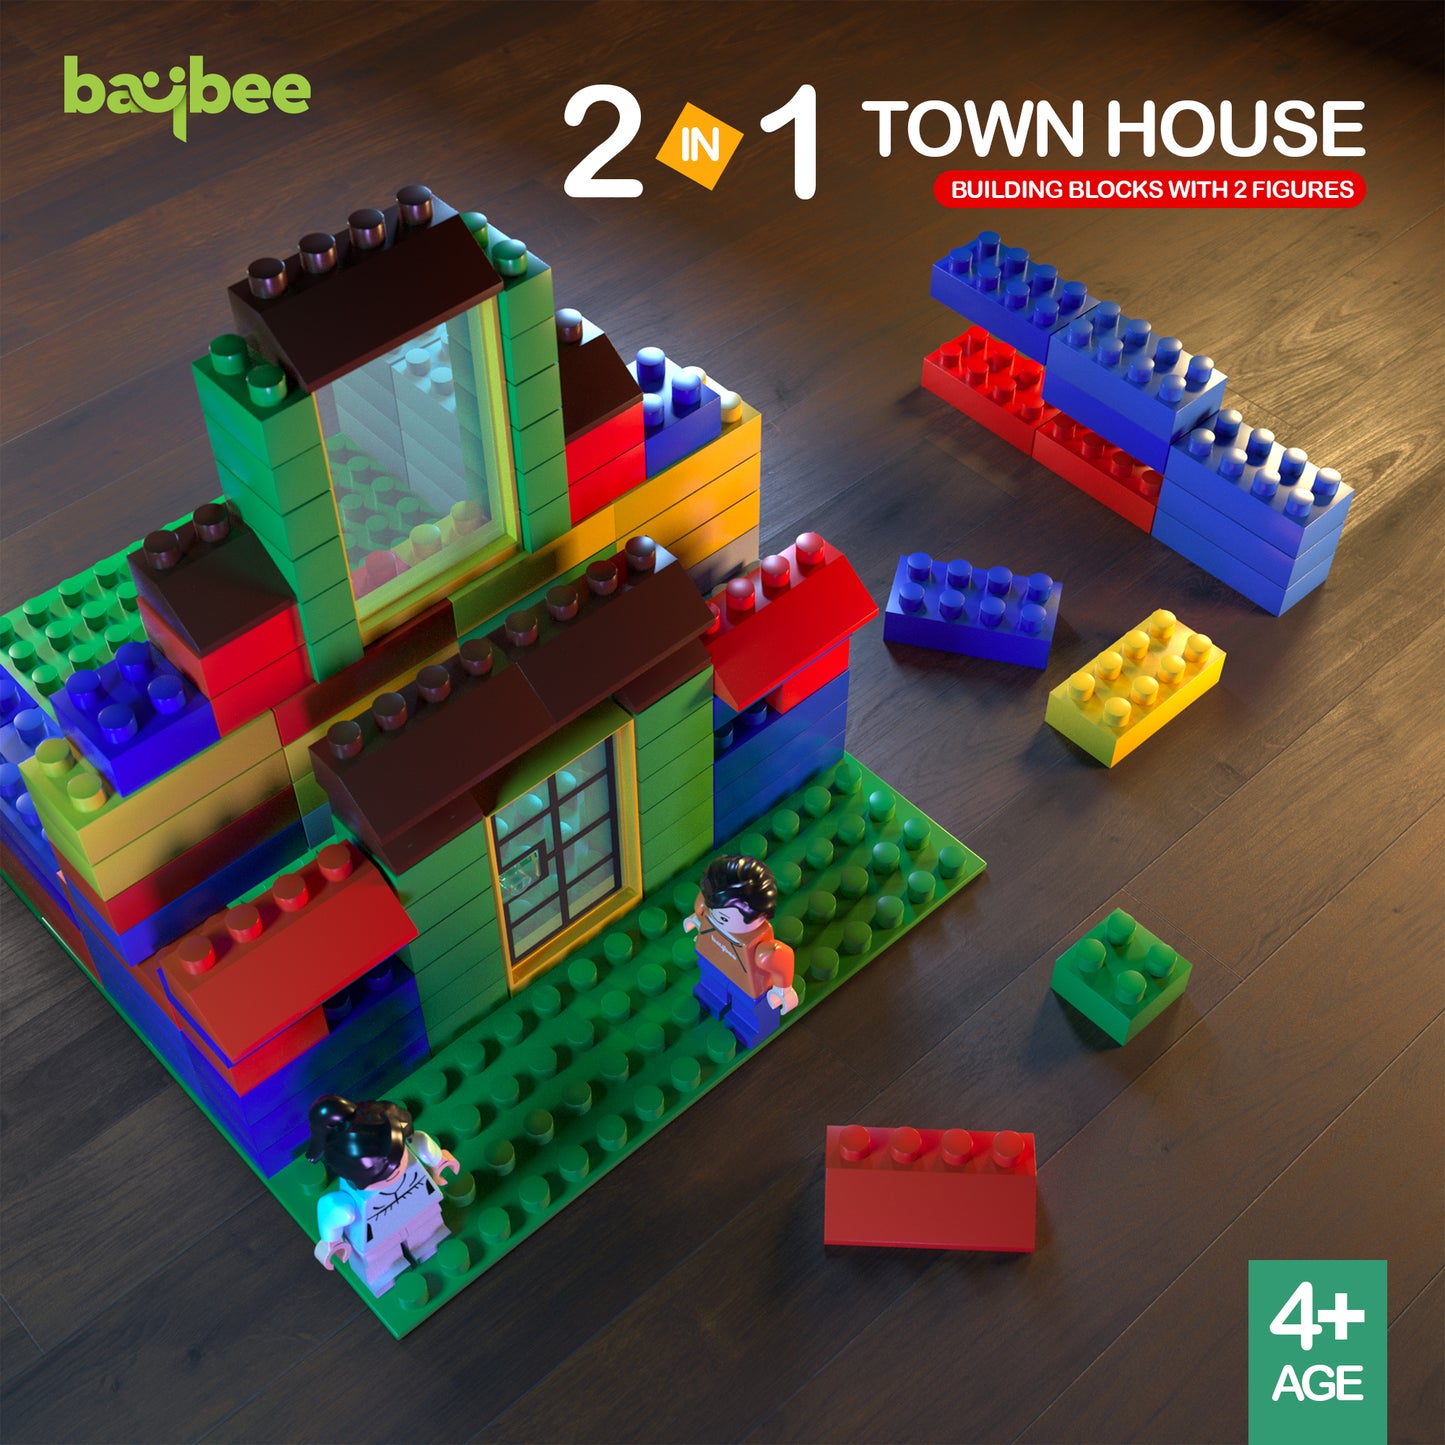 BAYBEE 3 in 1 Town of Stacking House DIY Plastic Building Blocks Toys for Kids (278 Pcs)